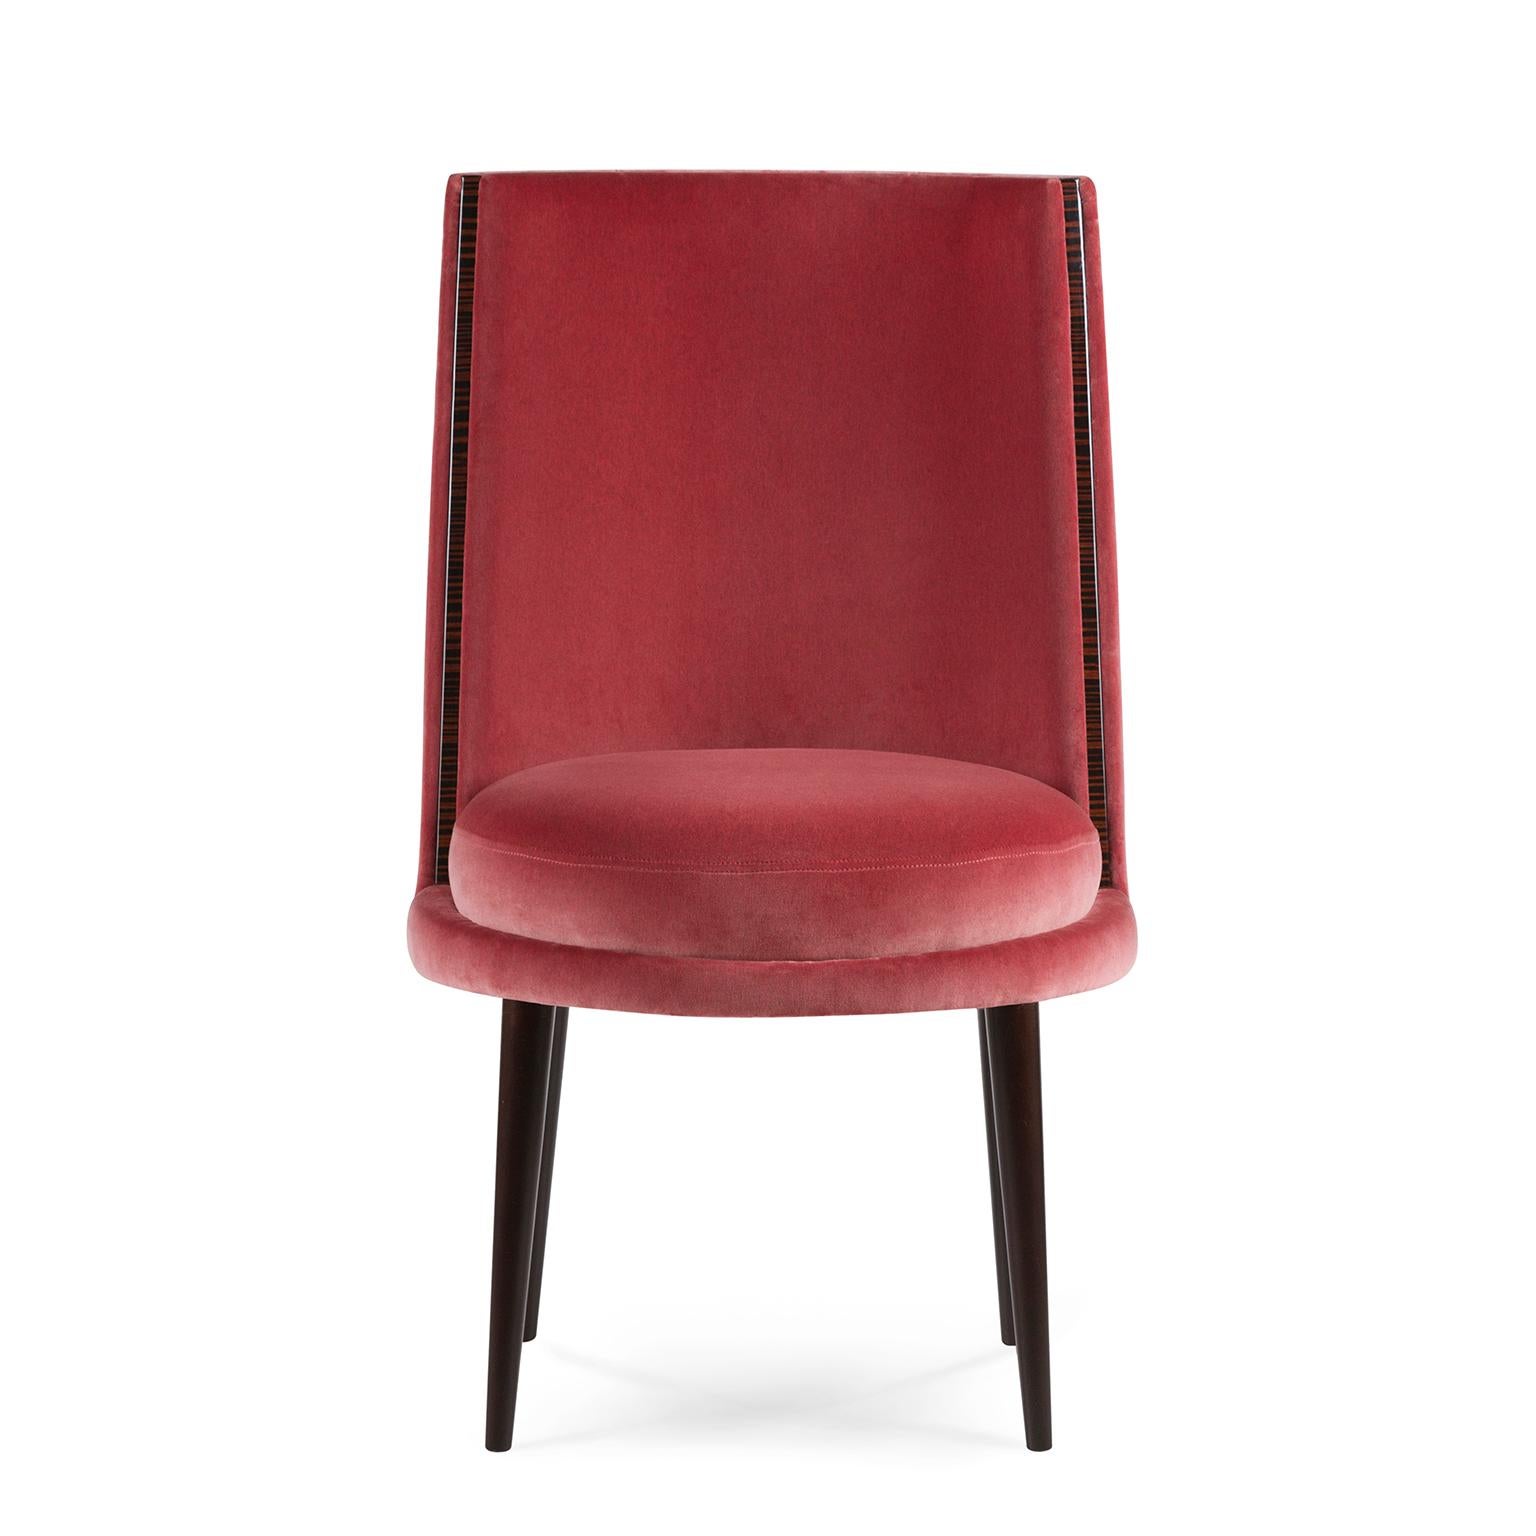 Hand-Crafted Modern De Castro Dining Chair, Ruby Pink Velvet, Handmade Portugal by Greenapple For Sale